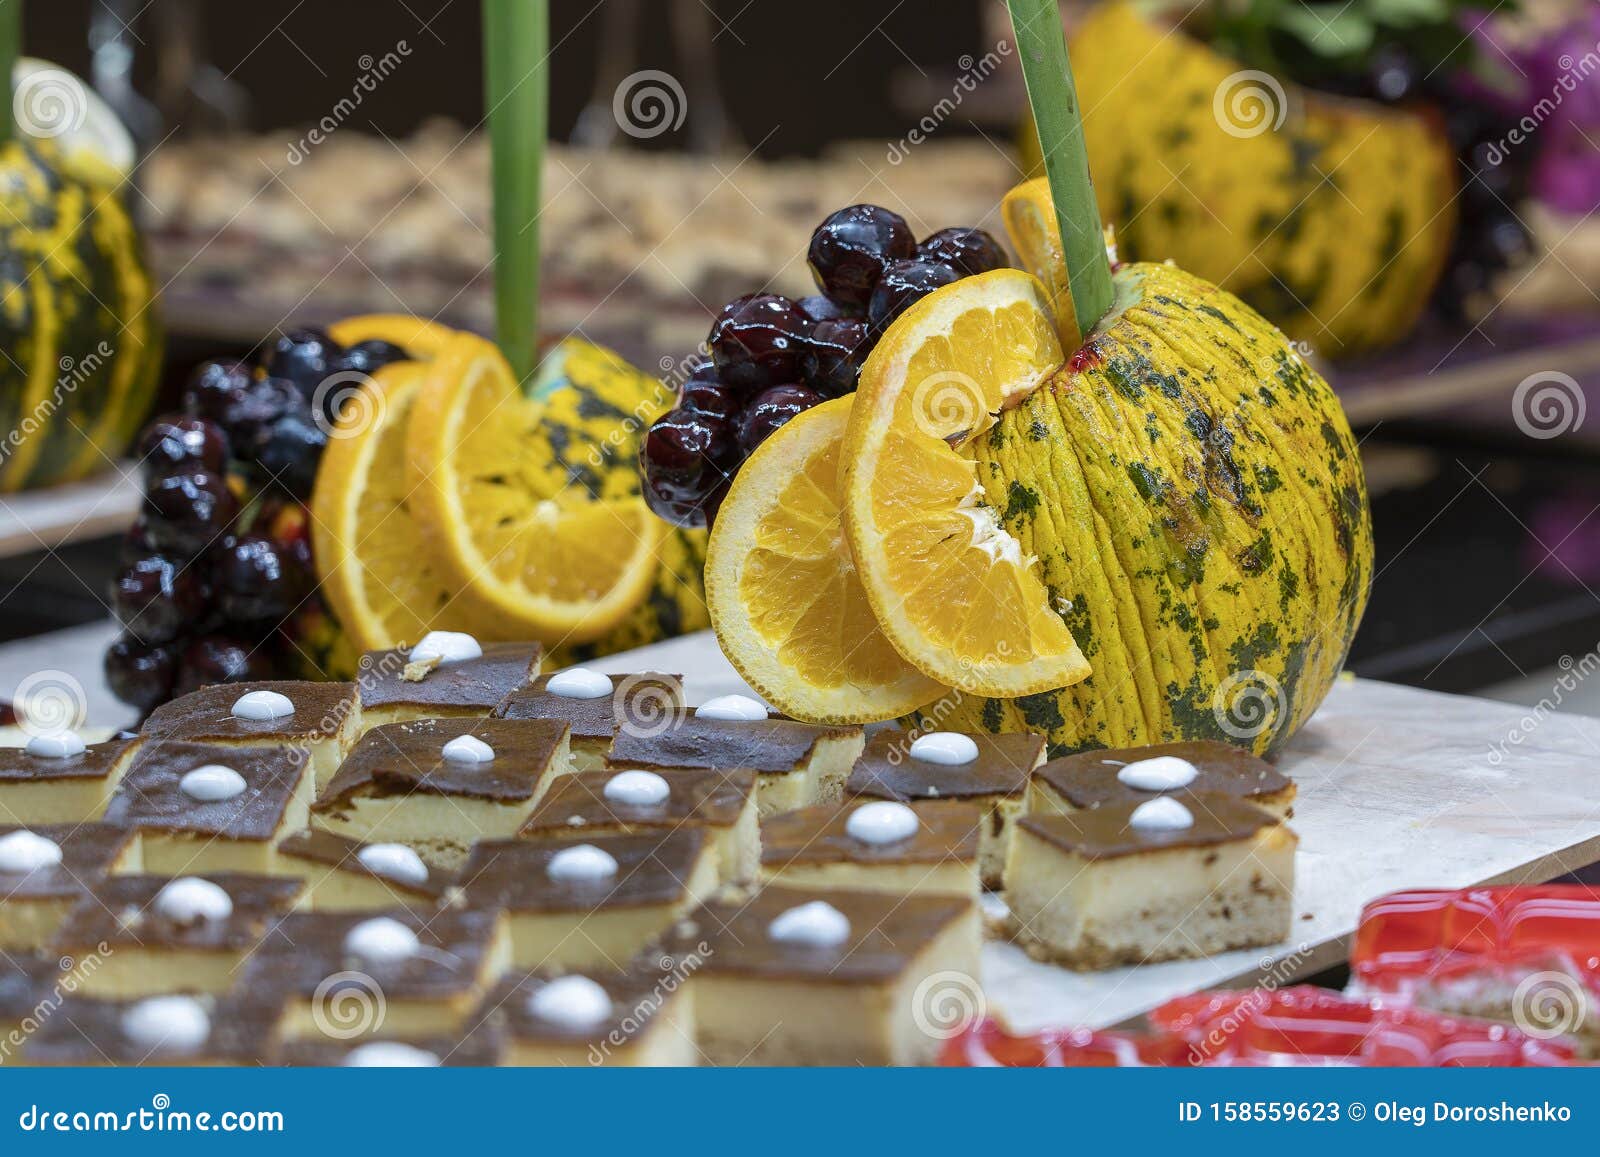 Pastries, Sweet Dessert And Decorated Fruit In The Dining Room At The